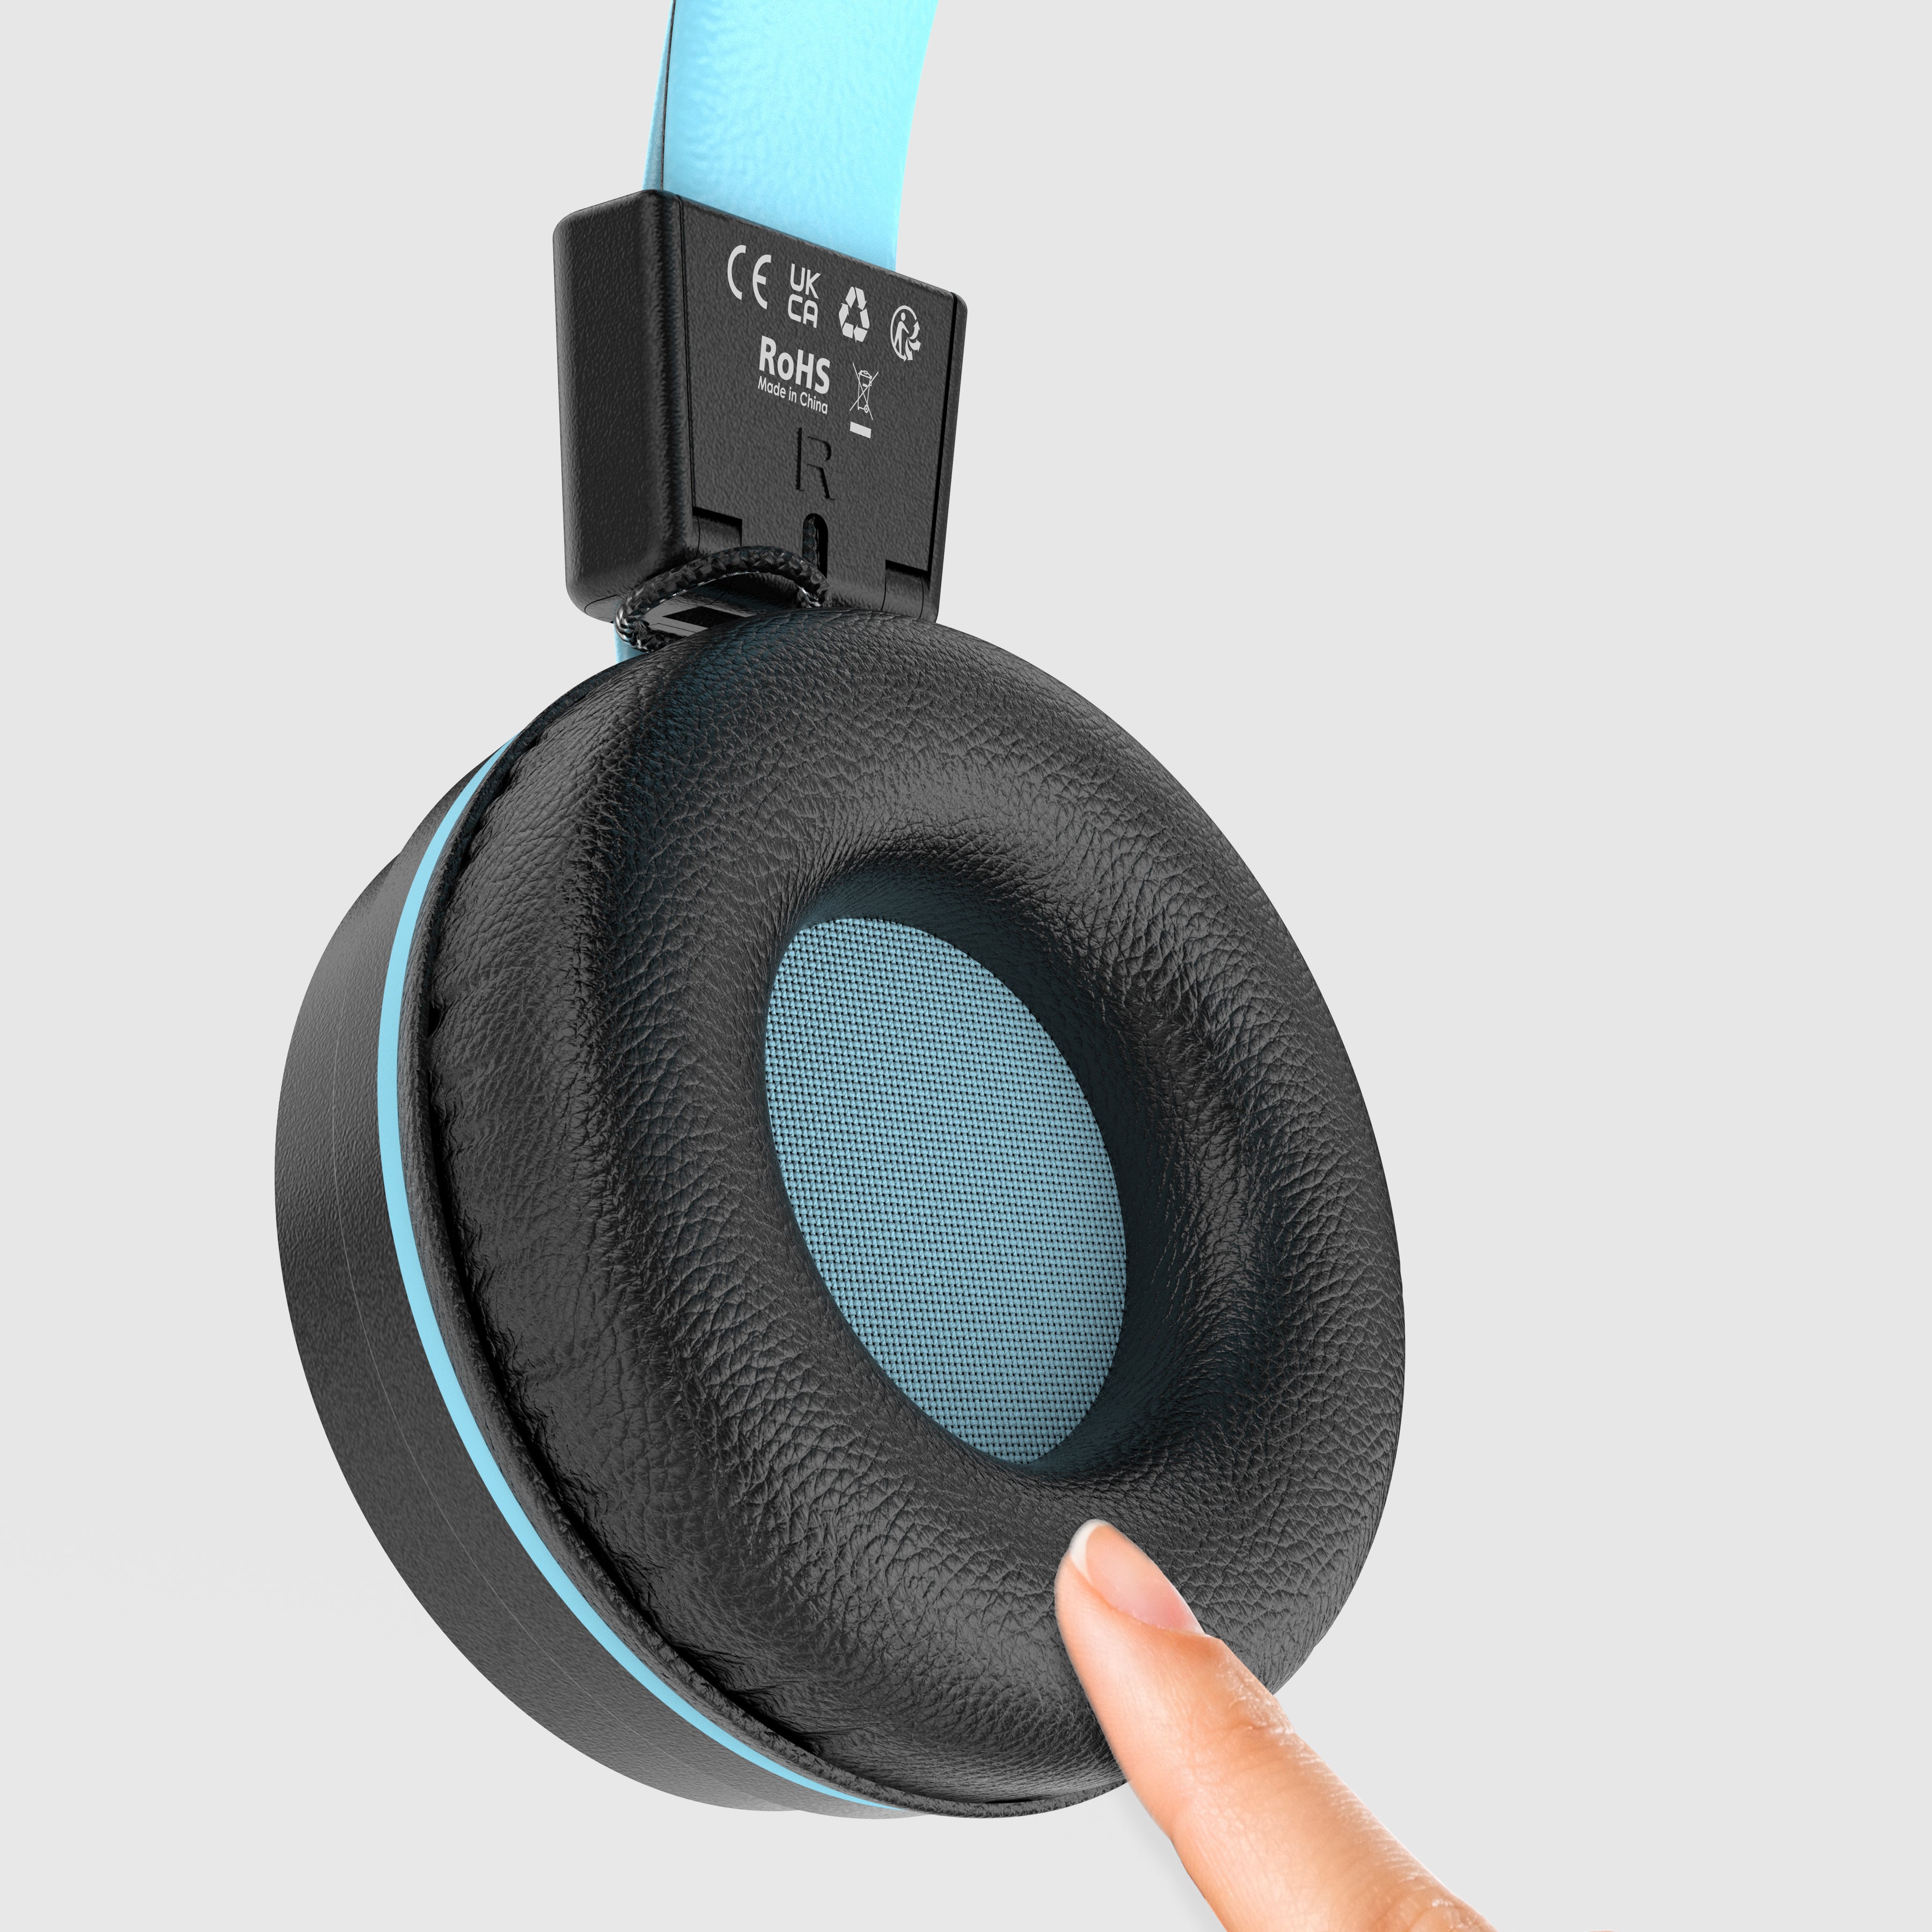 Close-up of a person's finger pressing on the cushioned ear pad of a black and blue headphone, displaying the softness of the ear pad, with icons indicating certifications on the headband.